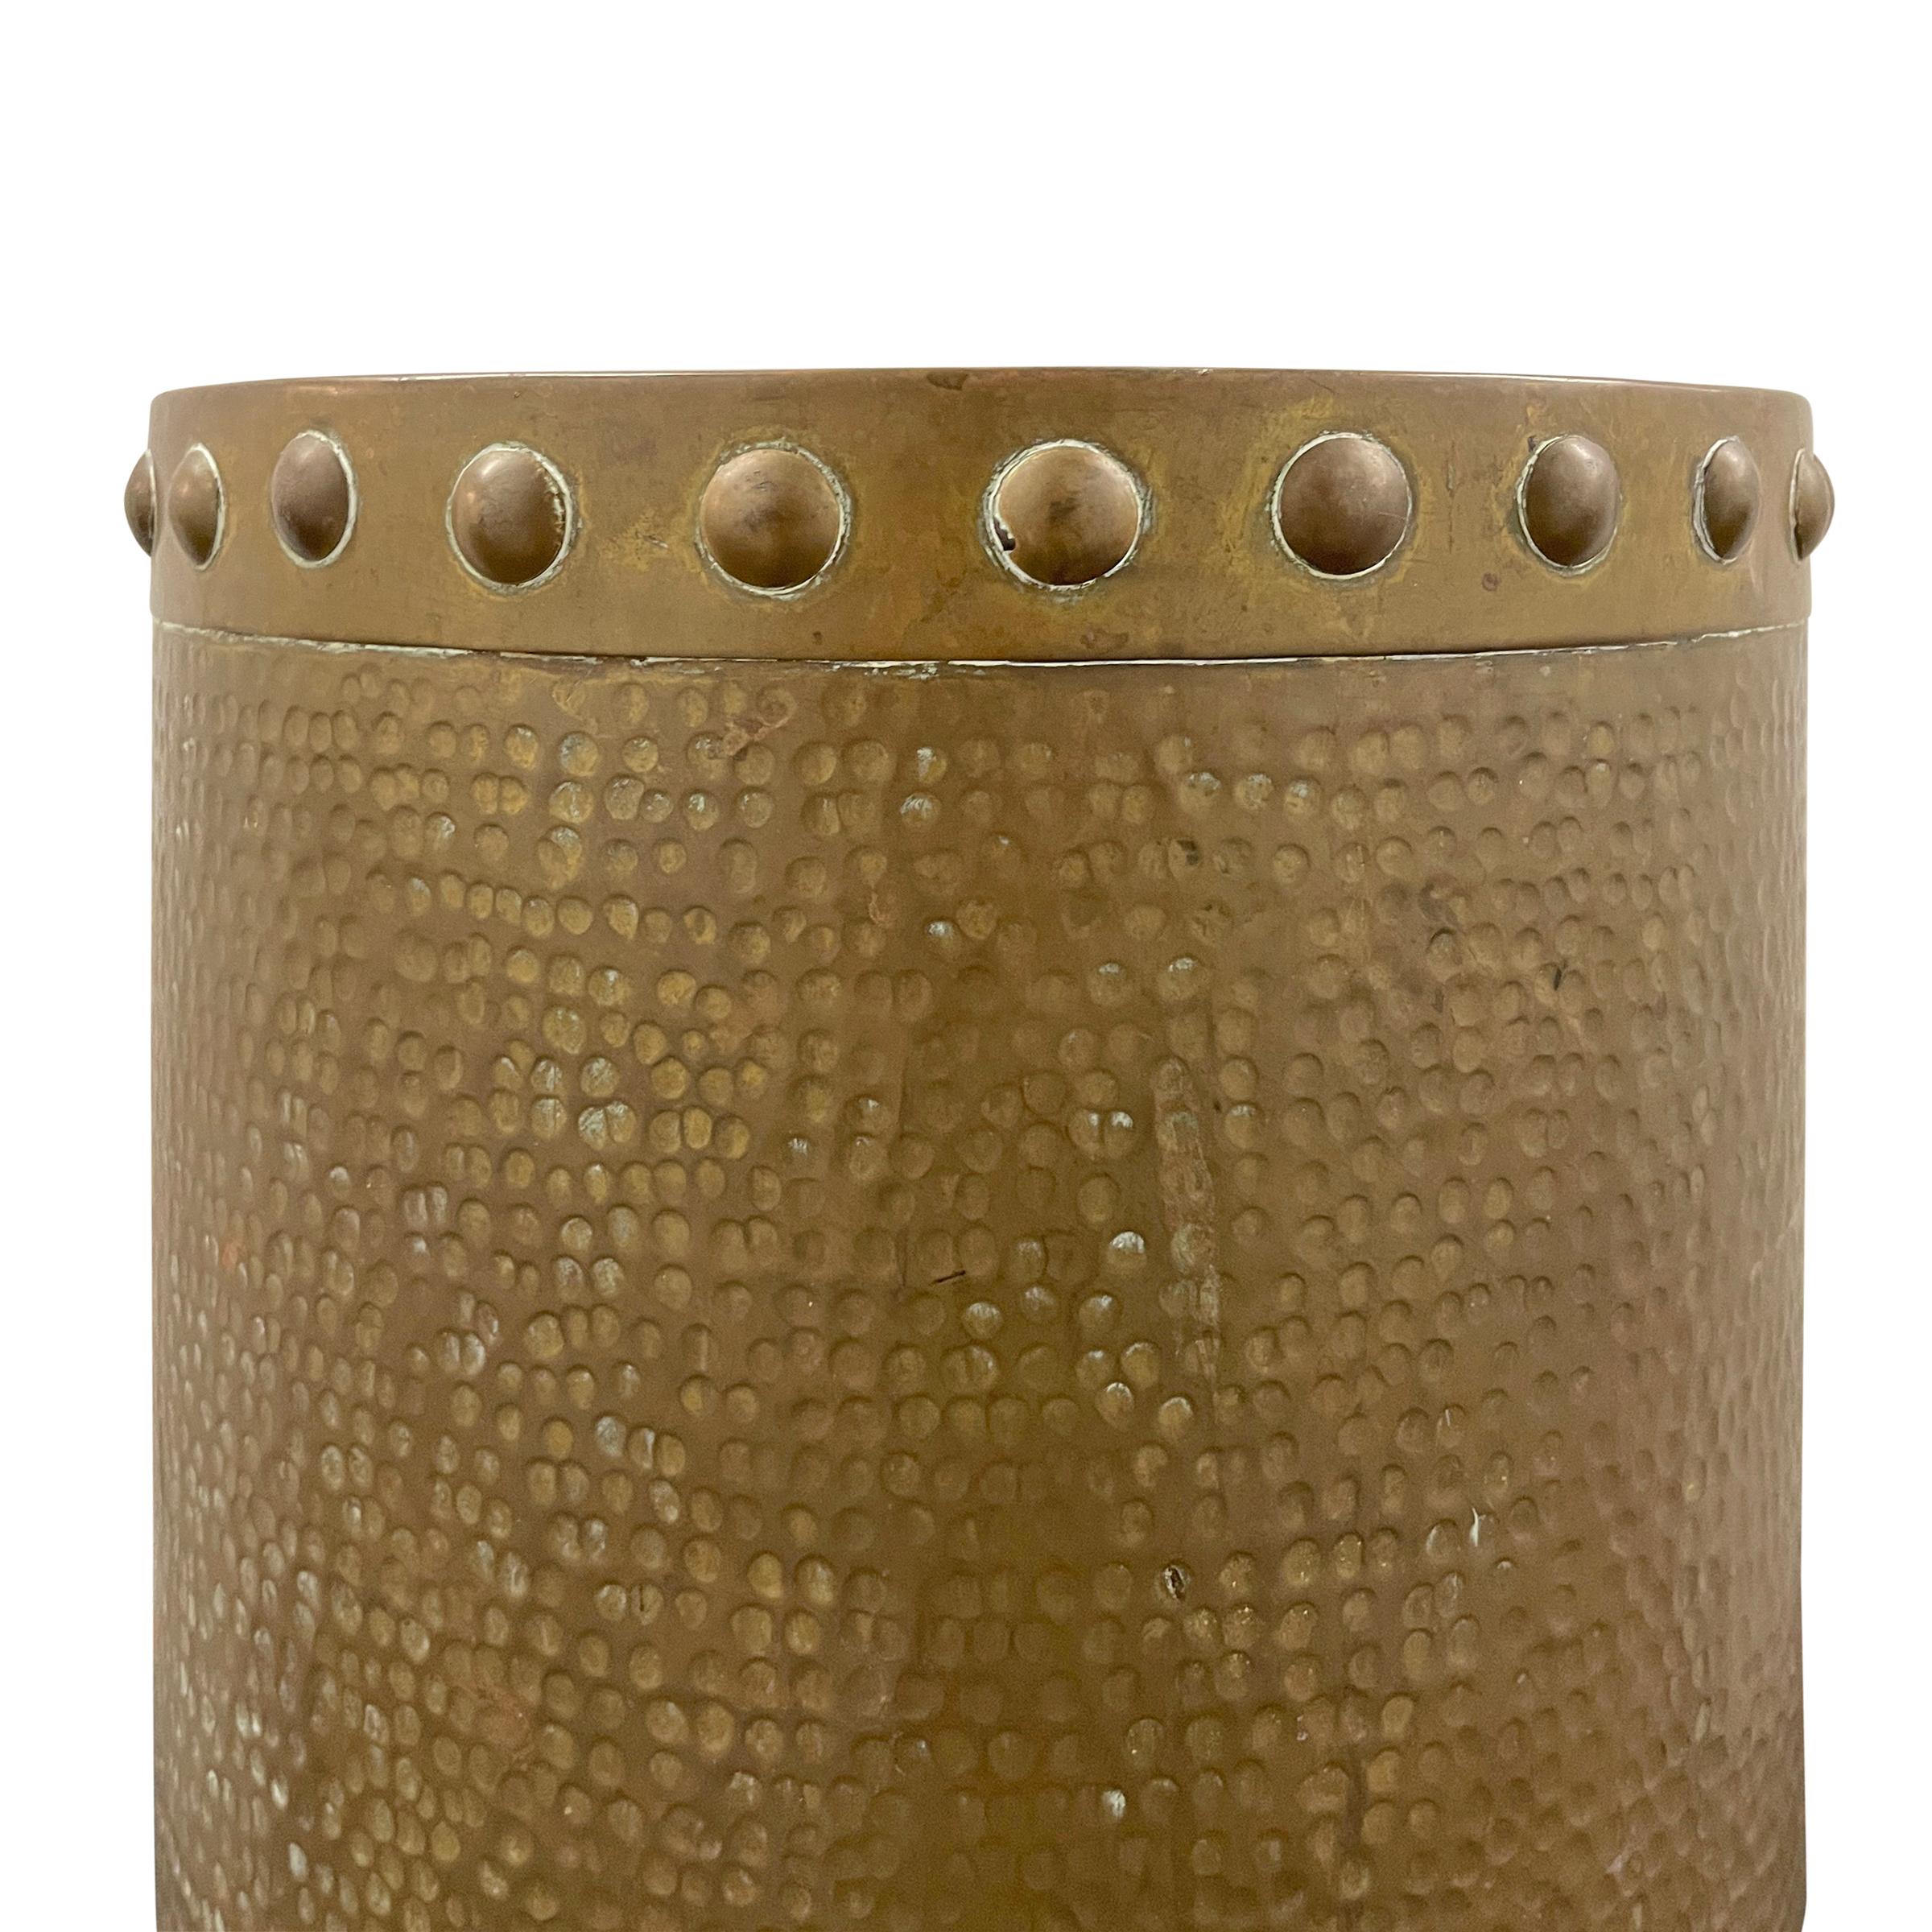 19th Century English Arts & Crafts Hammered Brass Bucket For Sale 2